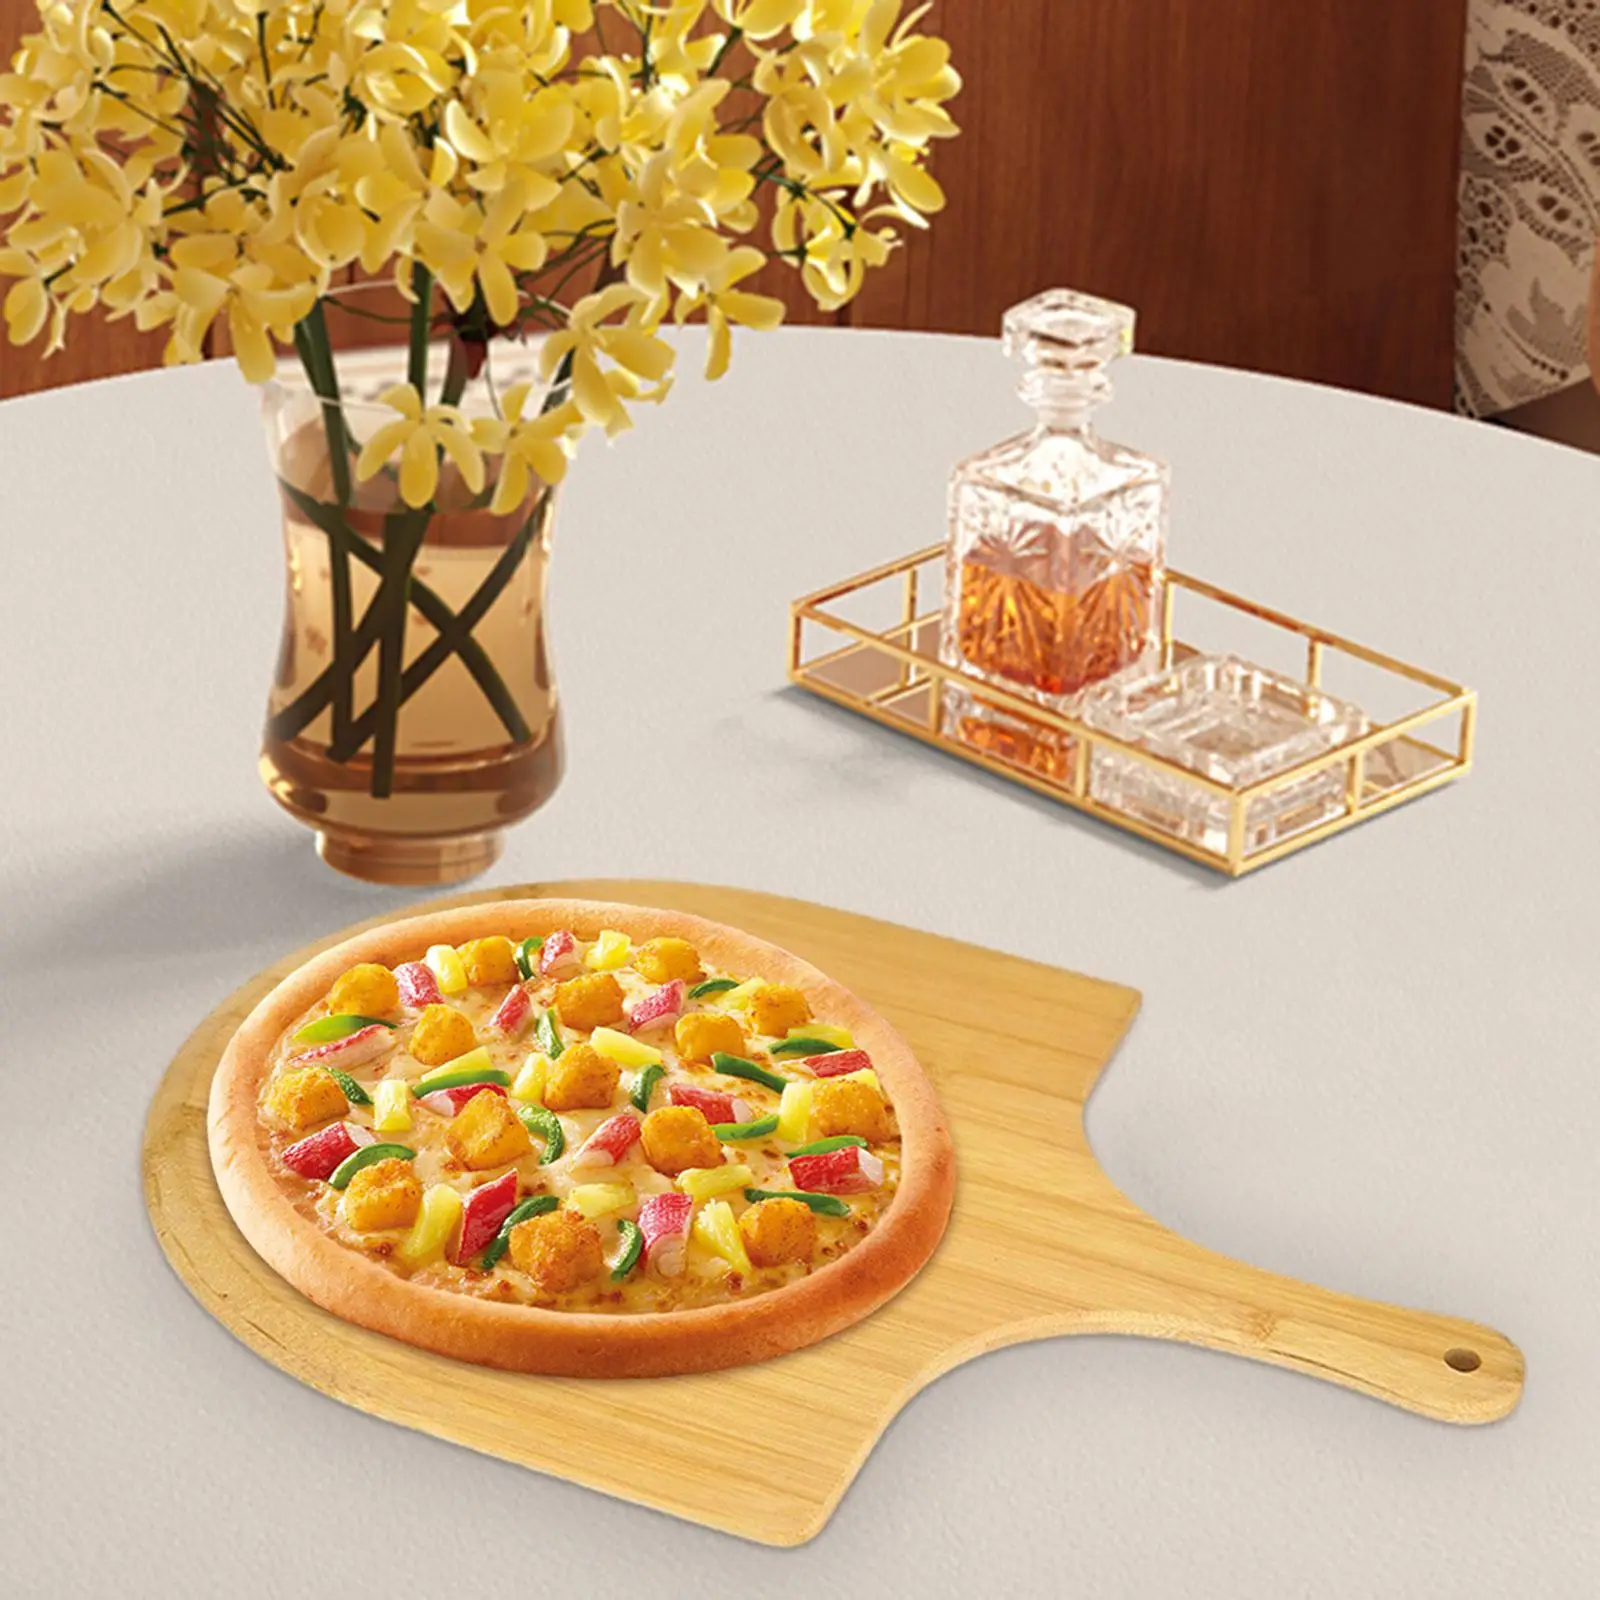 Bamboo Pizza Peel Baking Tools Wooden Pizza Cutting Board with Comfortable Handle for Bread Fruit Baking Cheese Vegetables